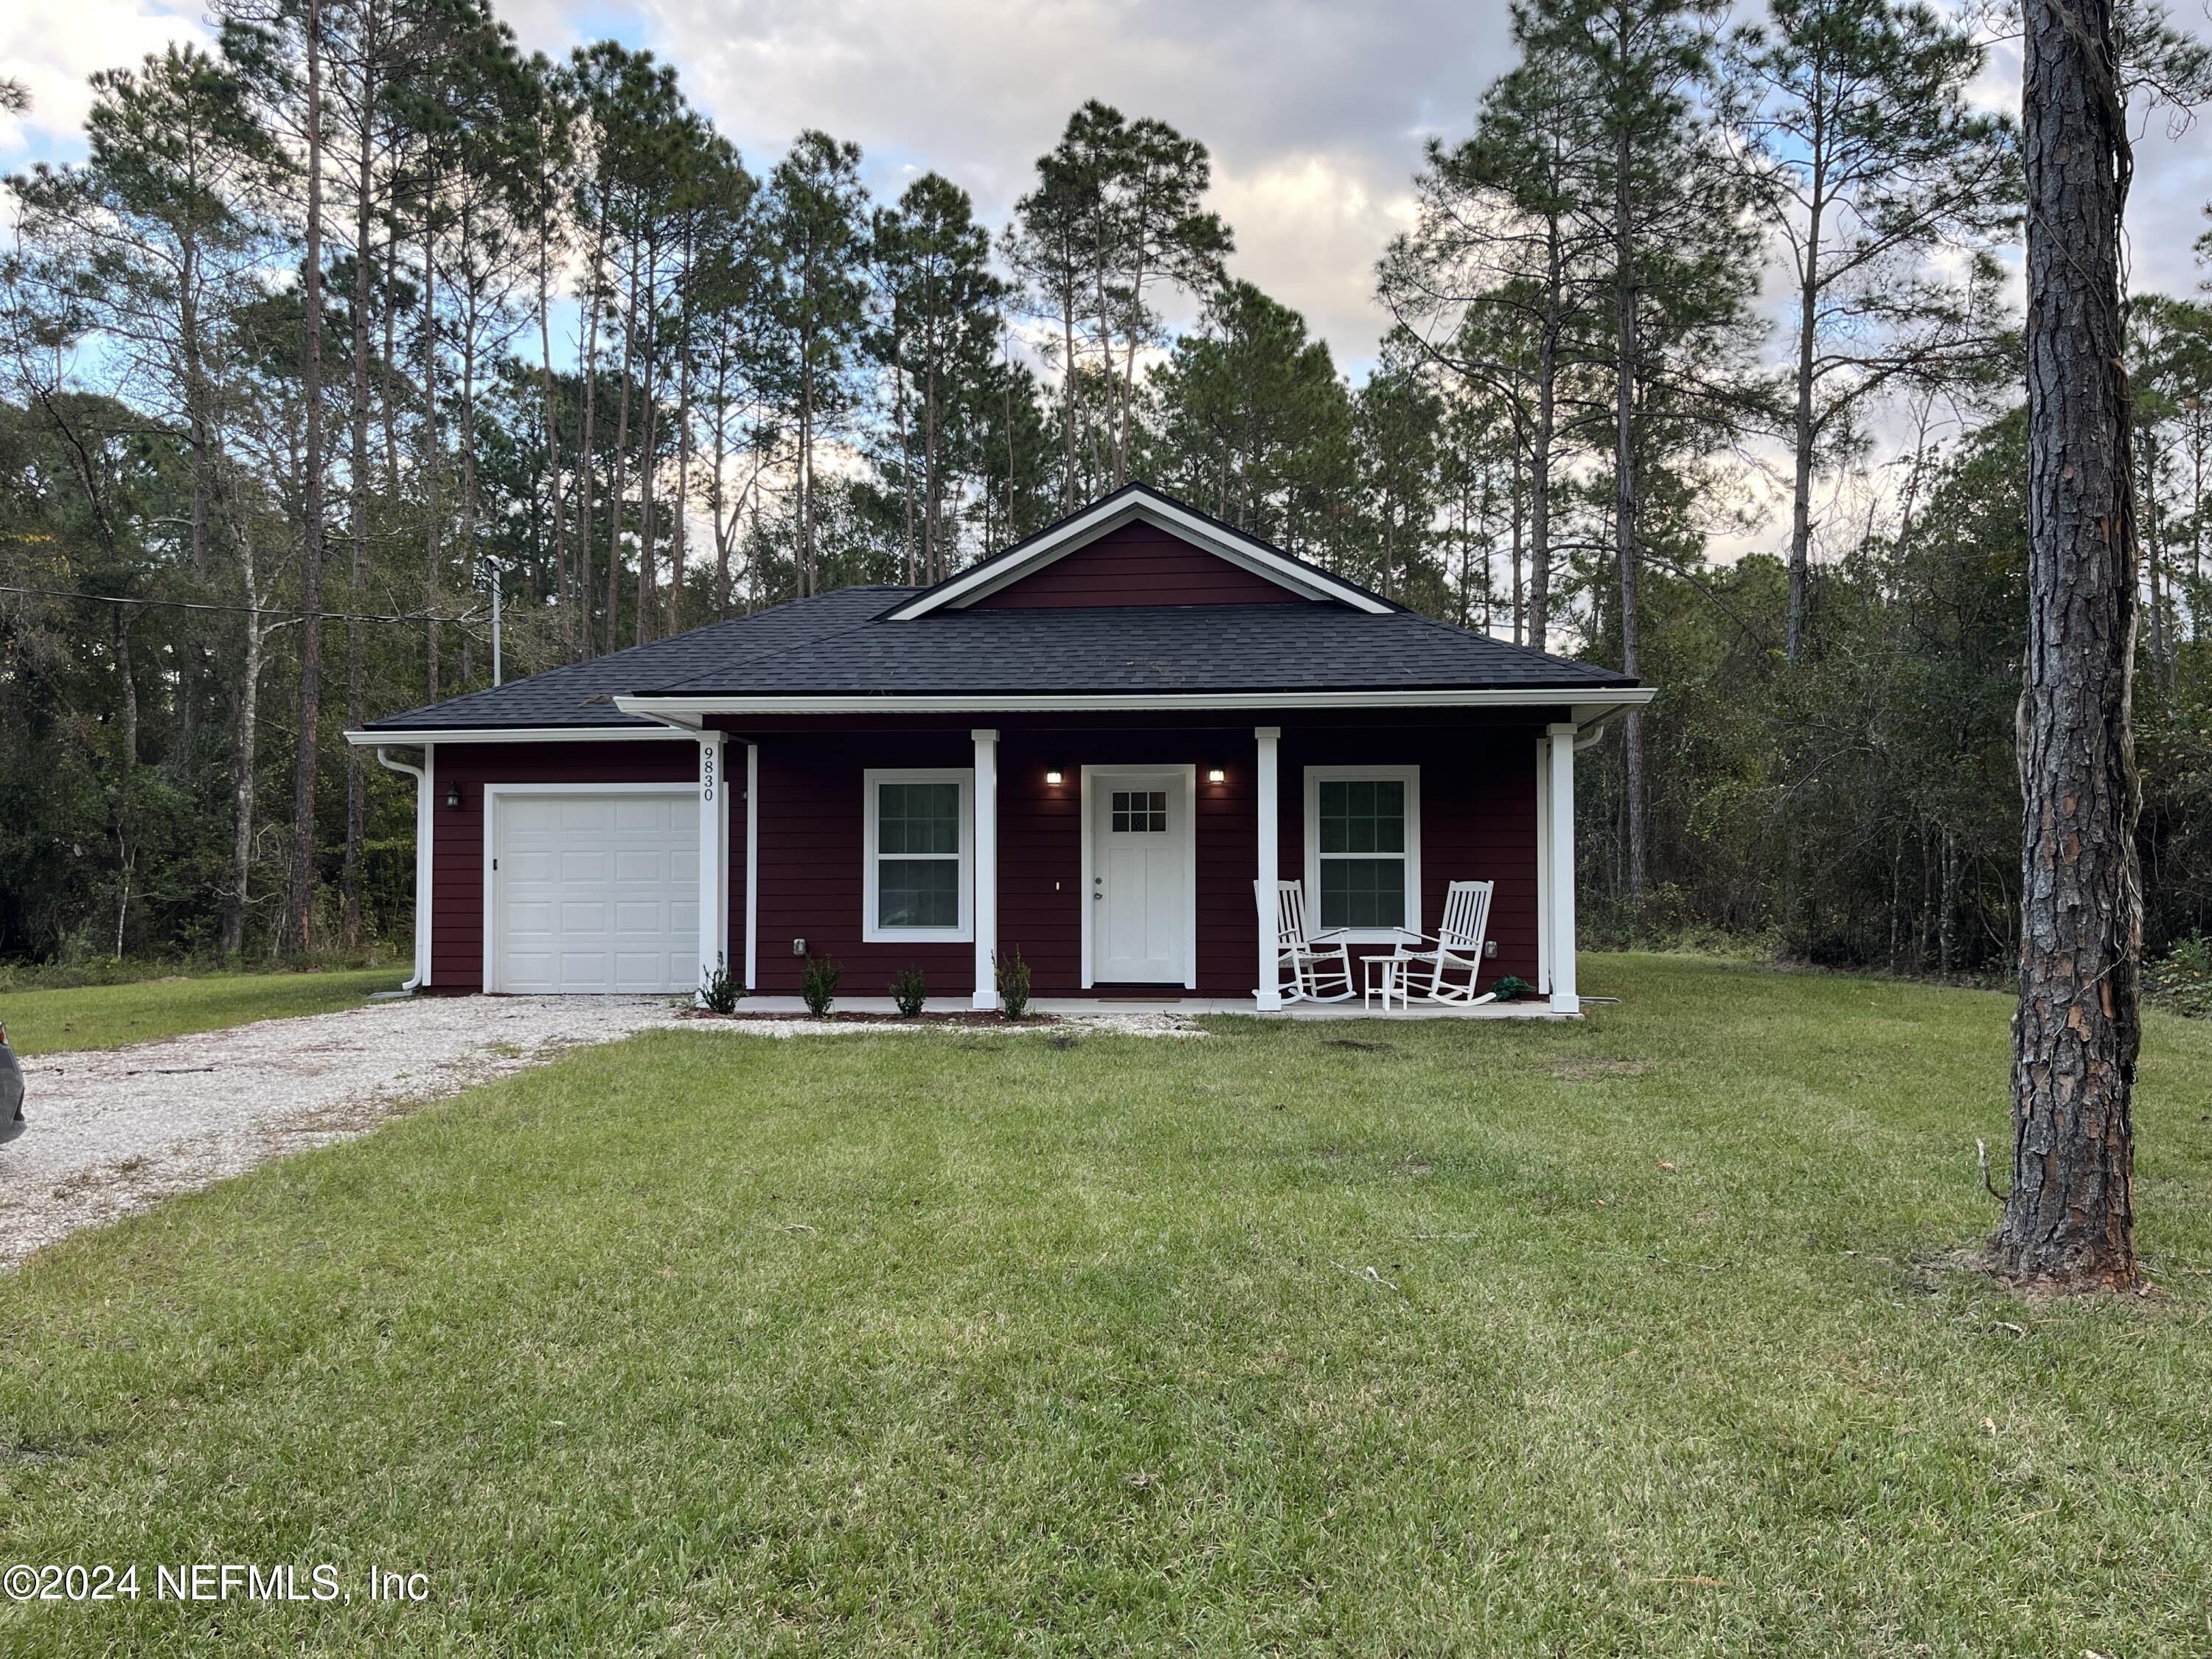 Hastings, FL home for sale located at 9830 EBERT Avenue, Hastings, FL 32145